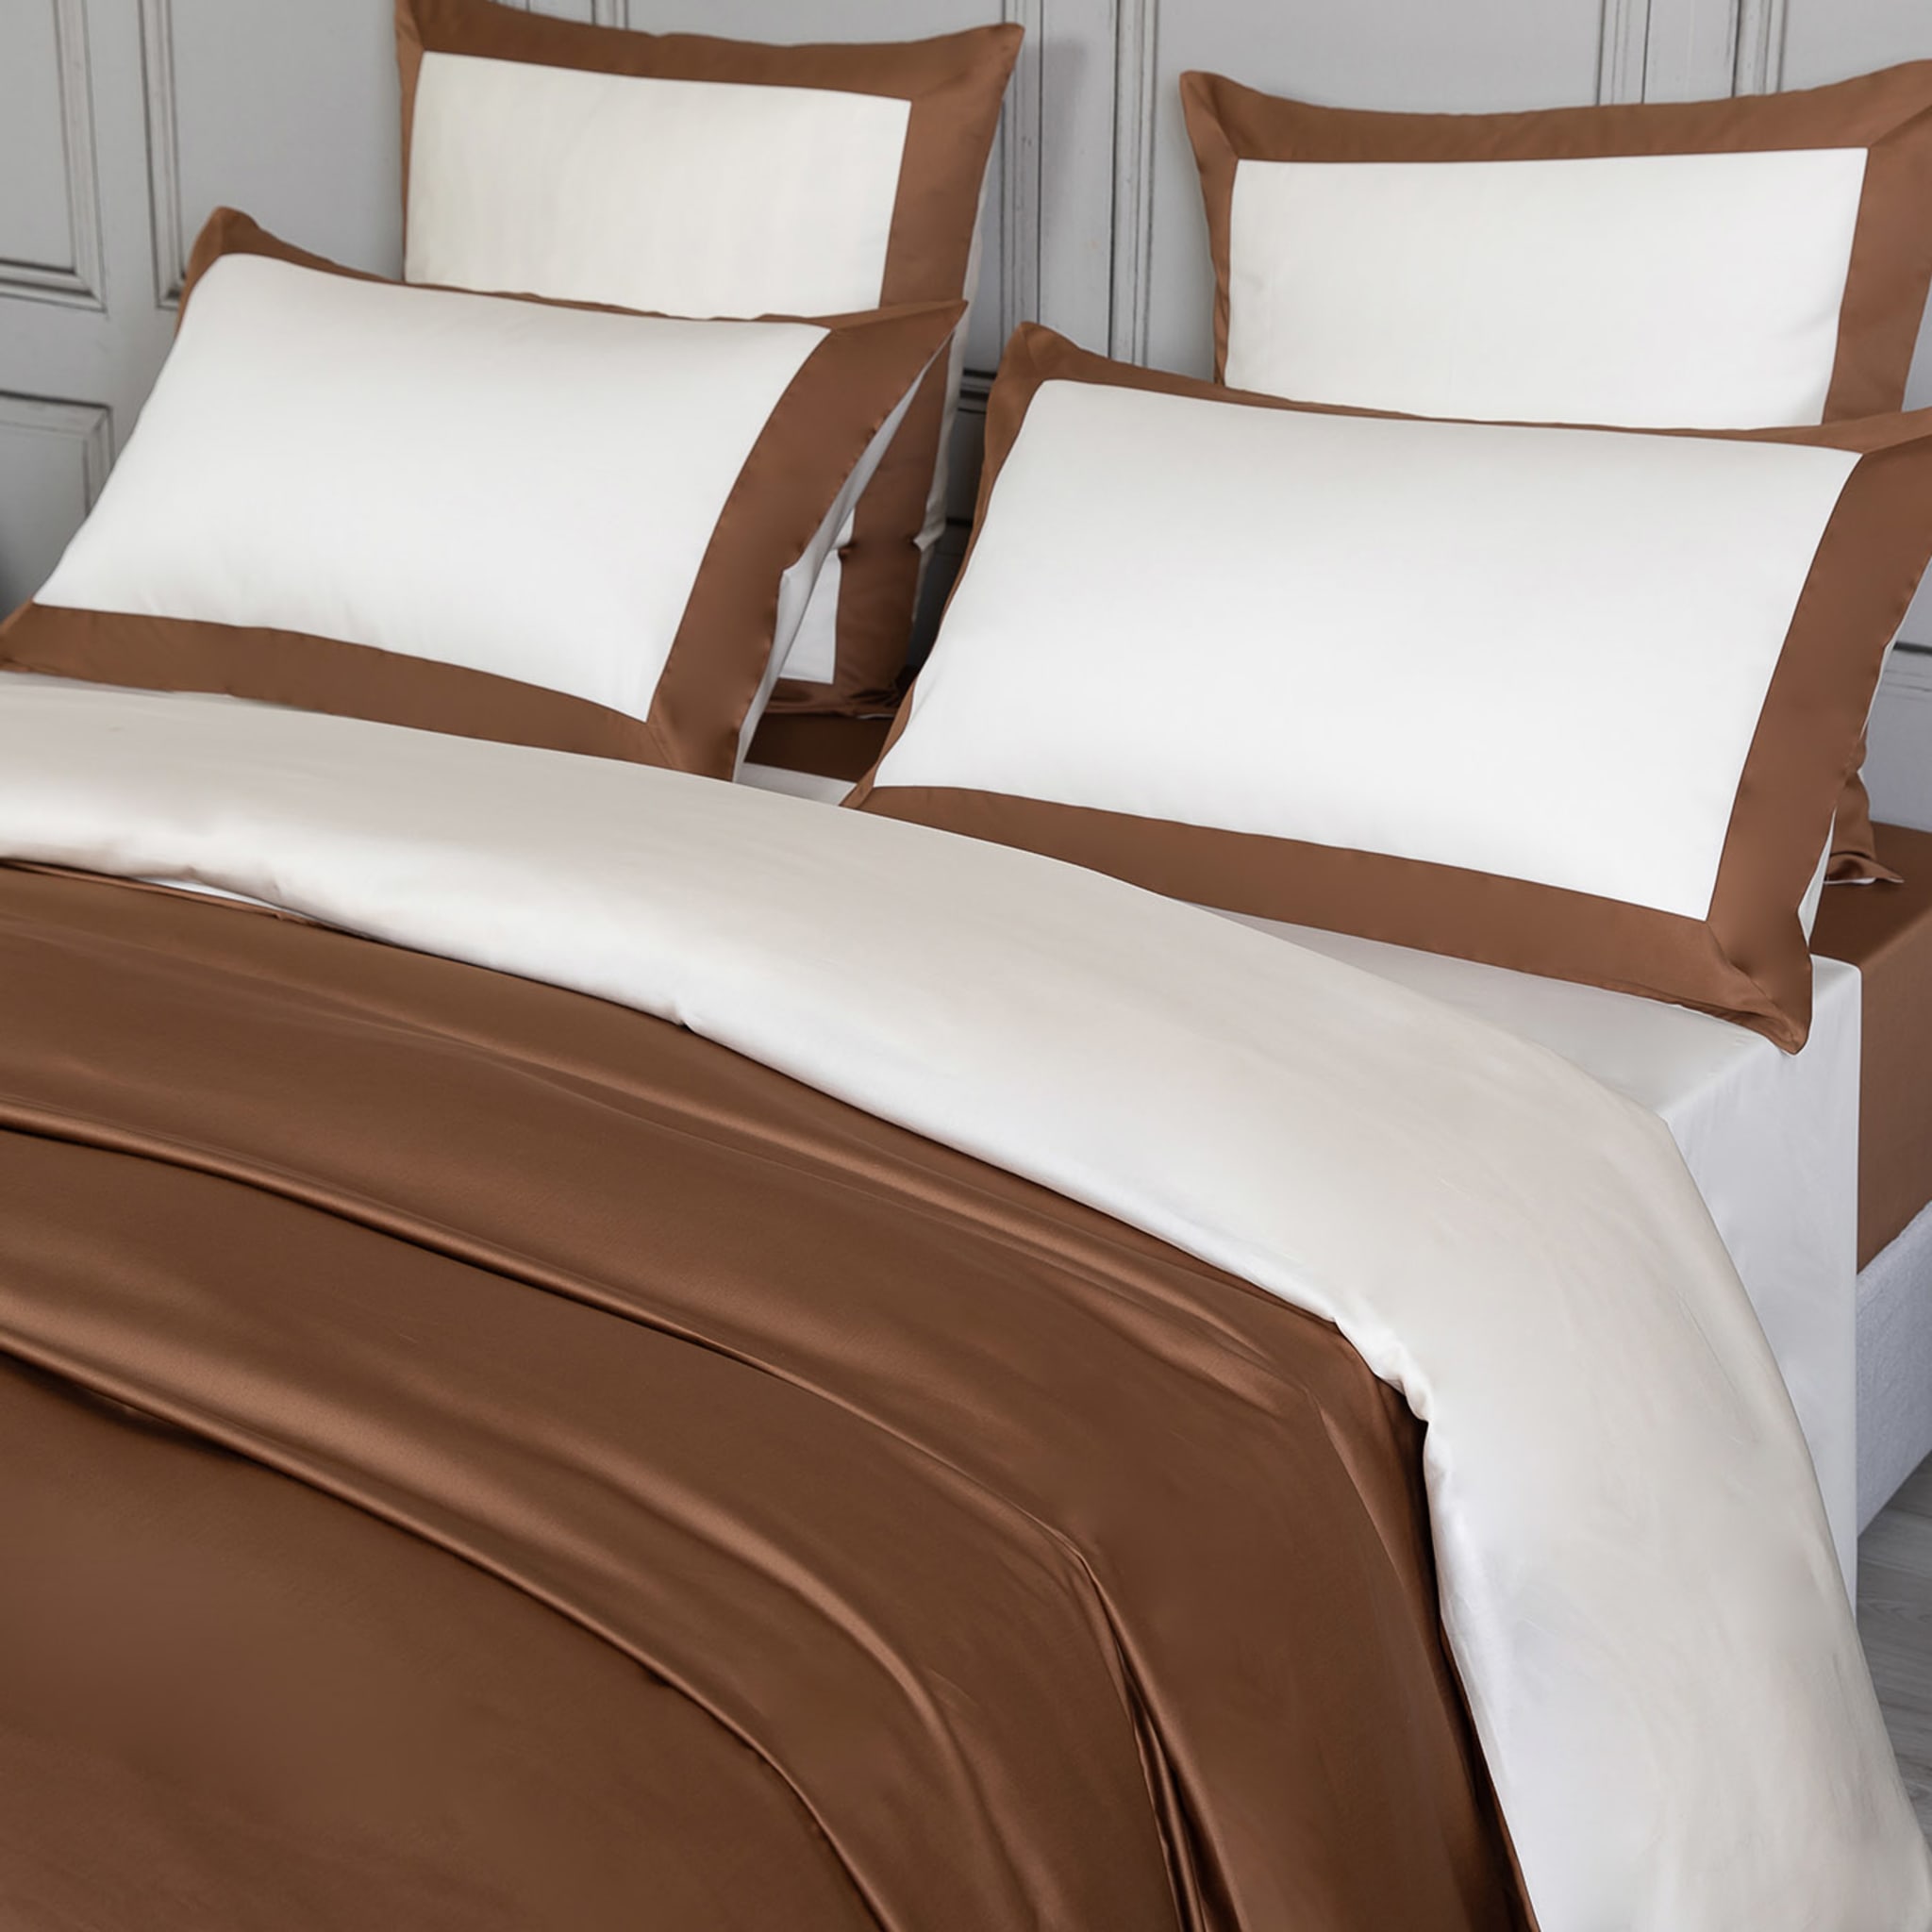 Apollo Set of Ivory & Chestnut Duvet Cover and 2 Pillowcases  - Alternative view 1